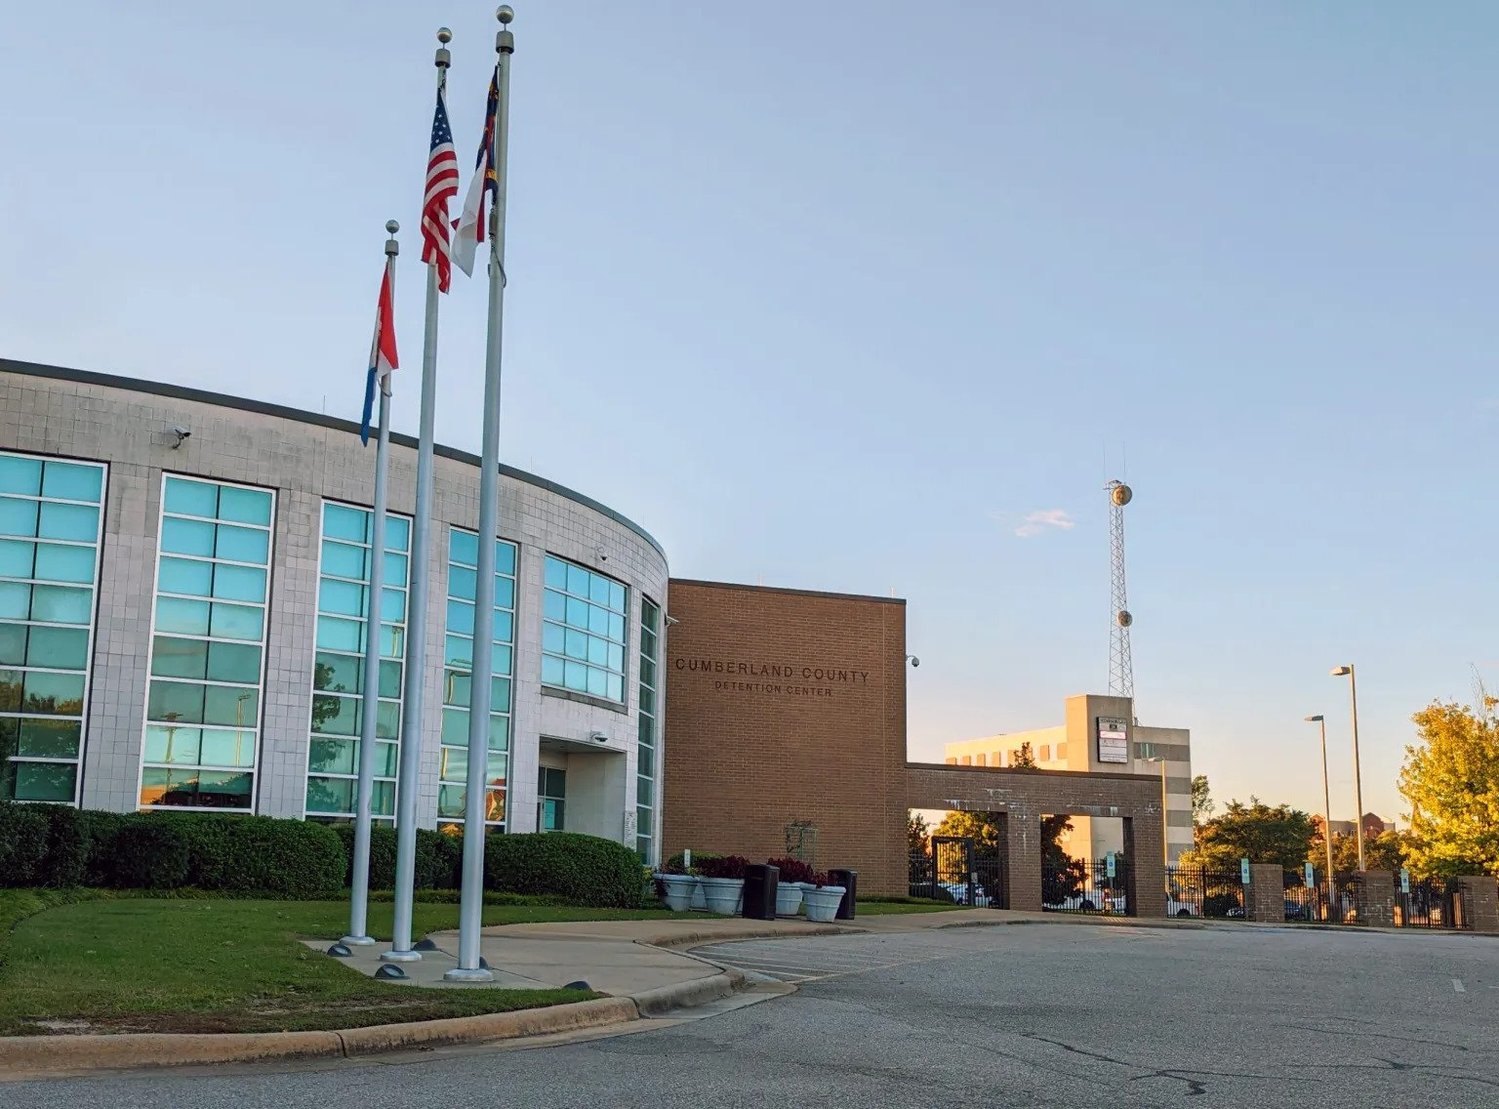 On Aug. 15, the Cumberland County Board of Commissioners approved $200,000 from opioid settlement funds for a multiyear project to support treatment for opioid addiction at the Cumberland County Detention Center.